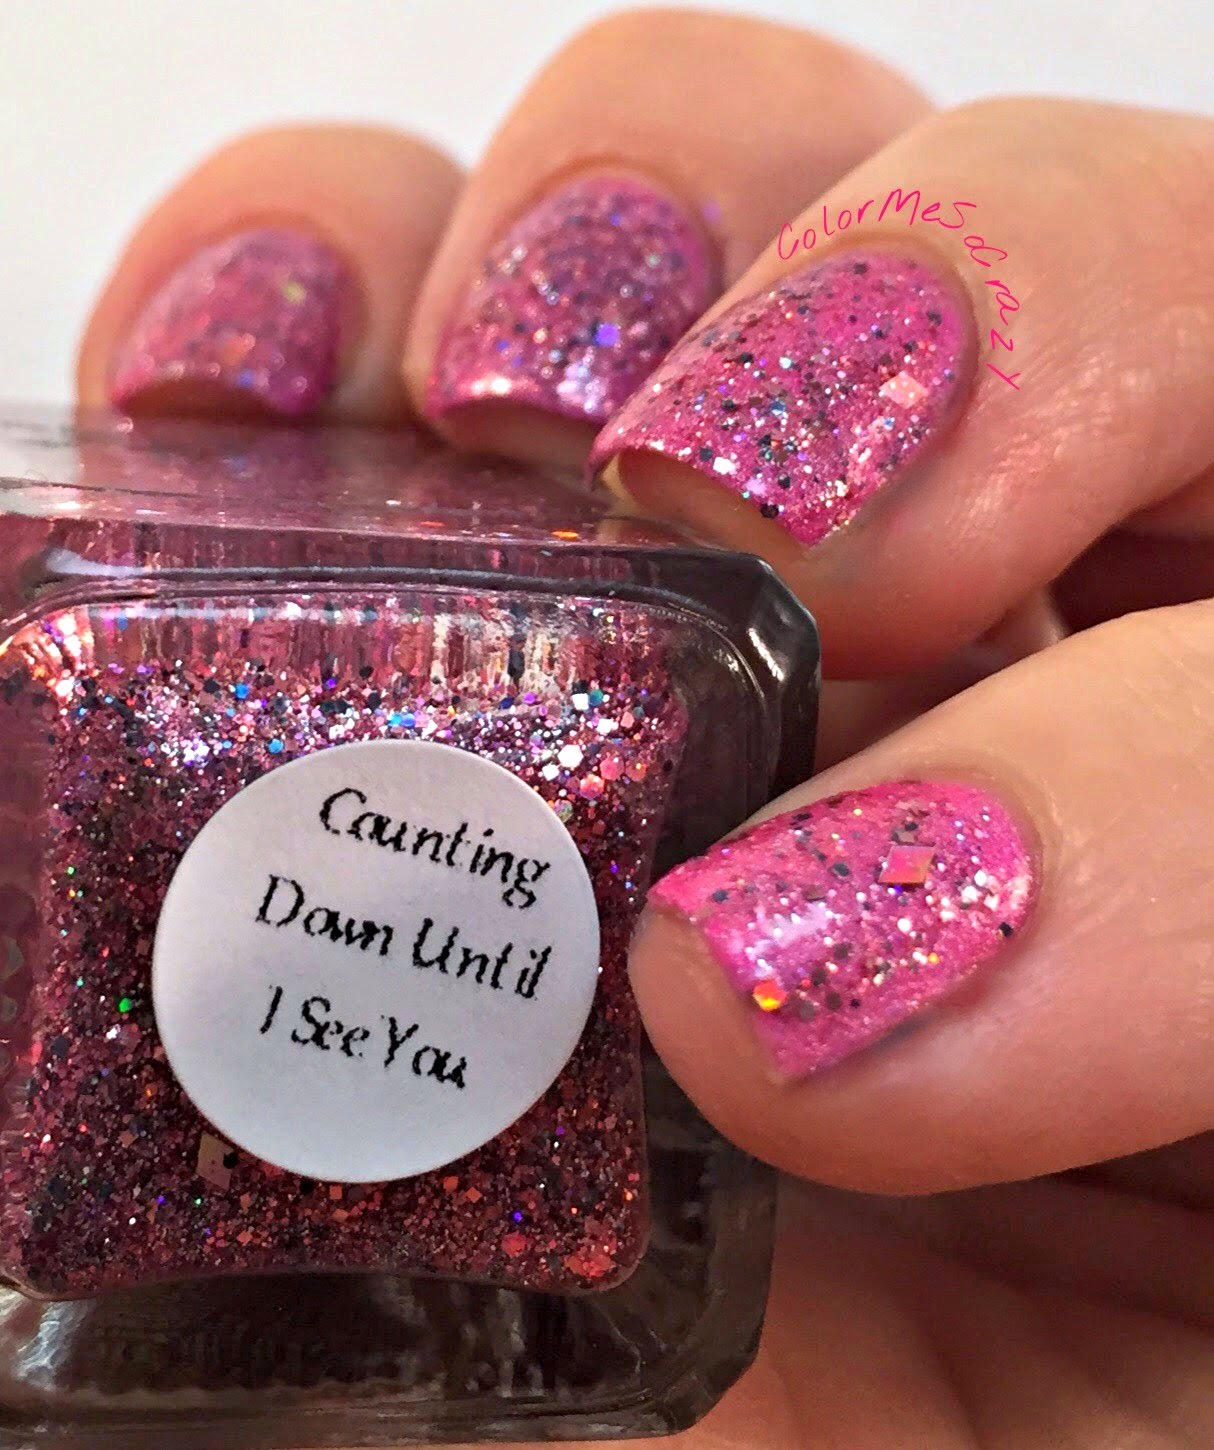 begl, blue eyed girl lacquer, nail polish, pink, spark in the dark, Couting down until I see you, pink glitter indie polish